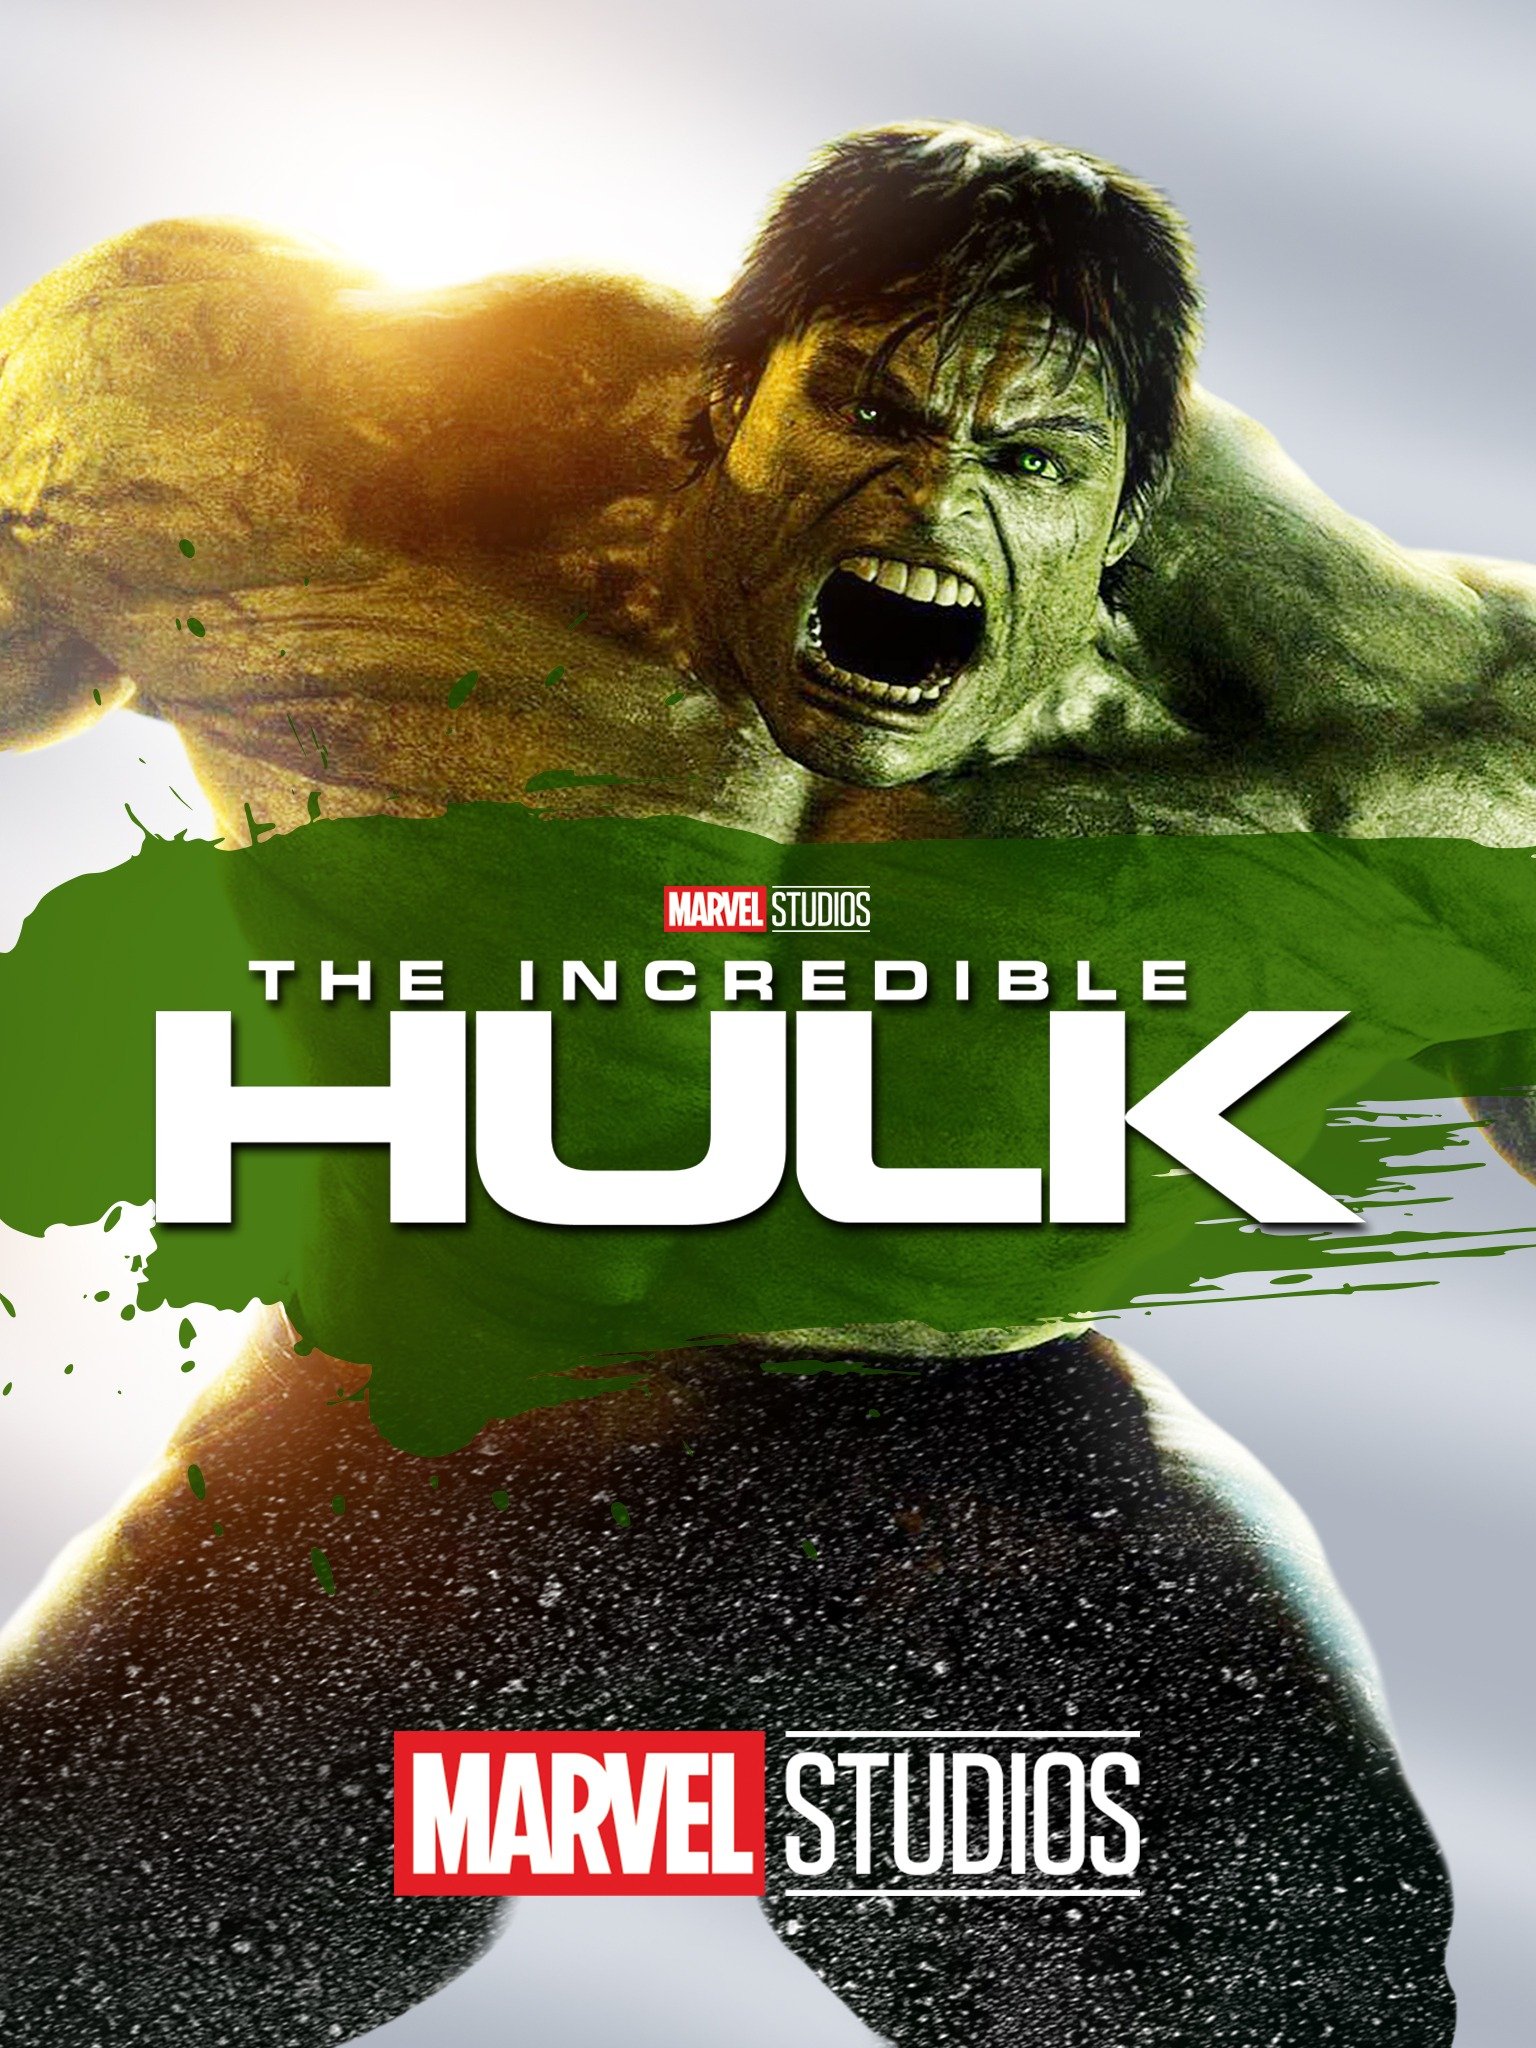 The Incredible Hulk - Rotten Tomatoes